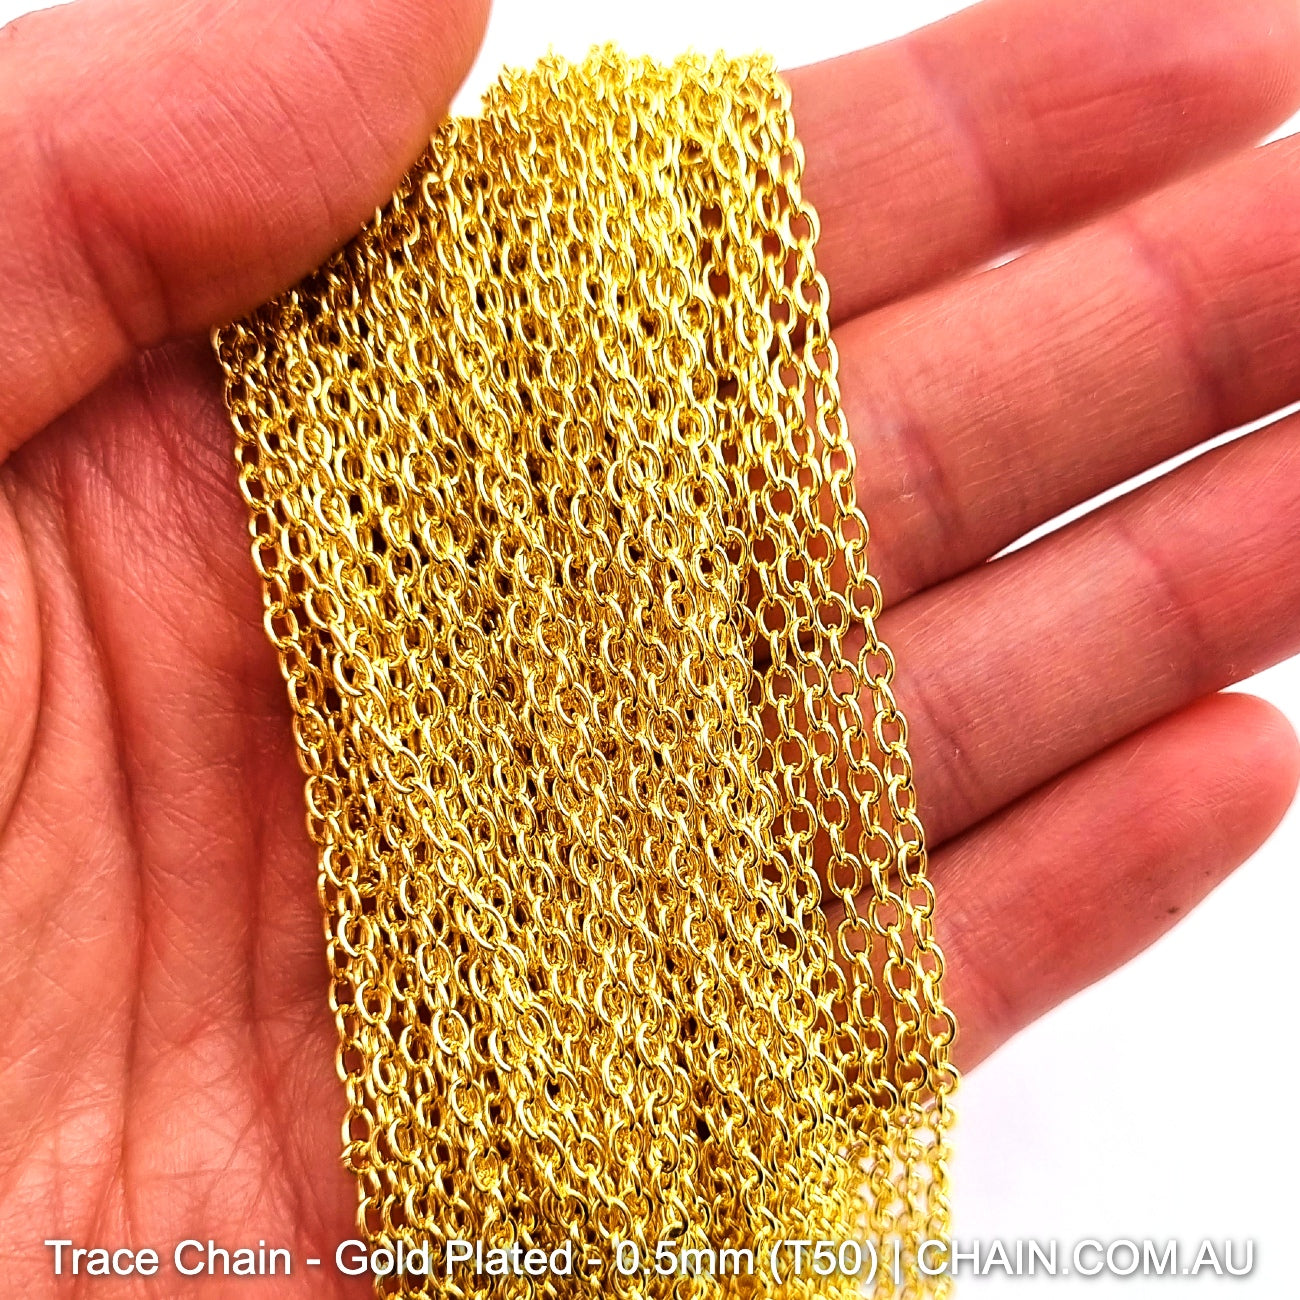 Trace Chain in a Gold Plated Finish. Size: 0.5mm, T50. Jewellery Chain, Australia wide shipping. Shop chain.com.au